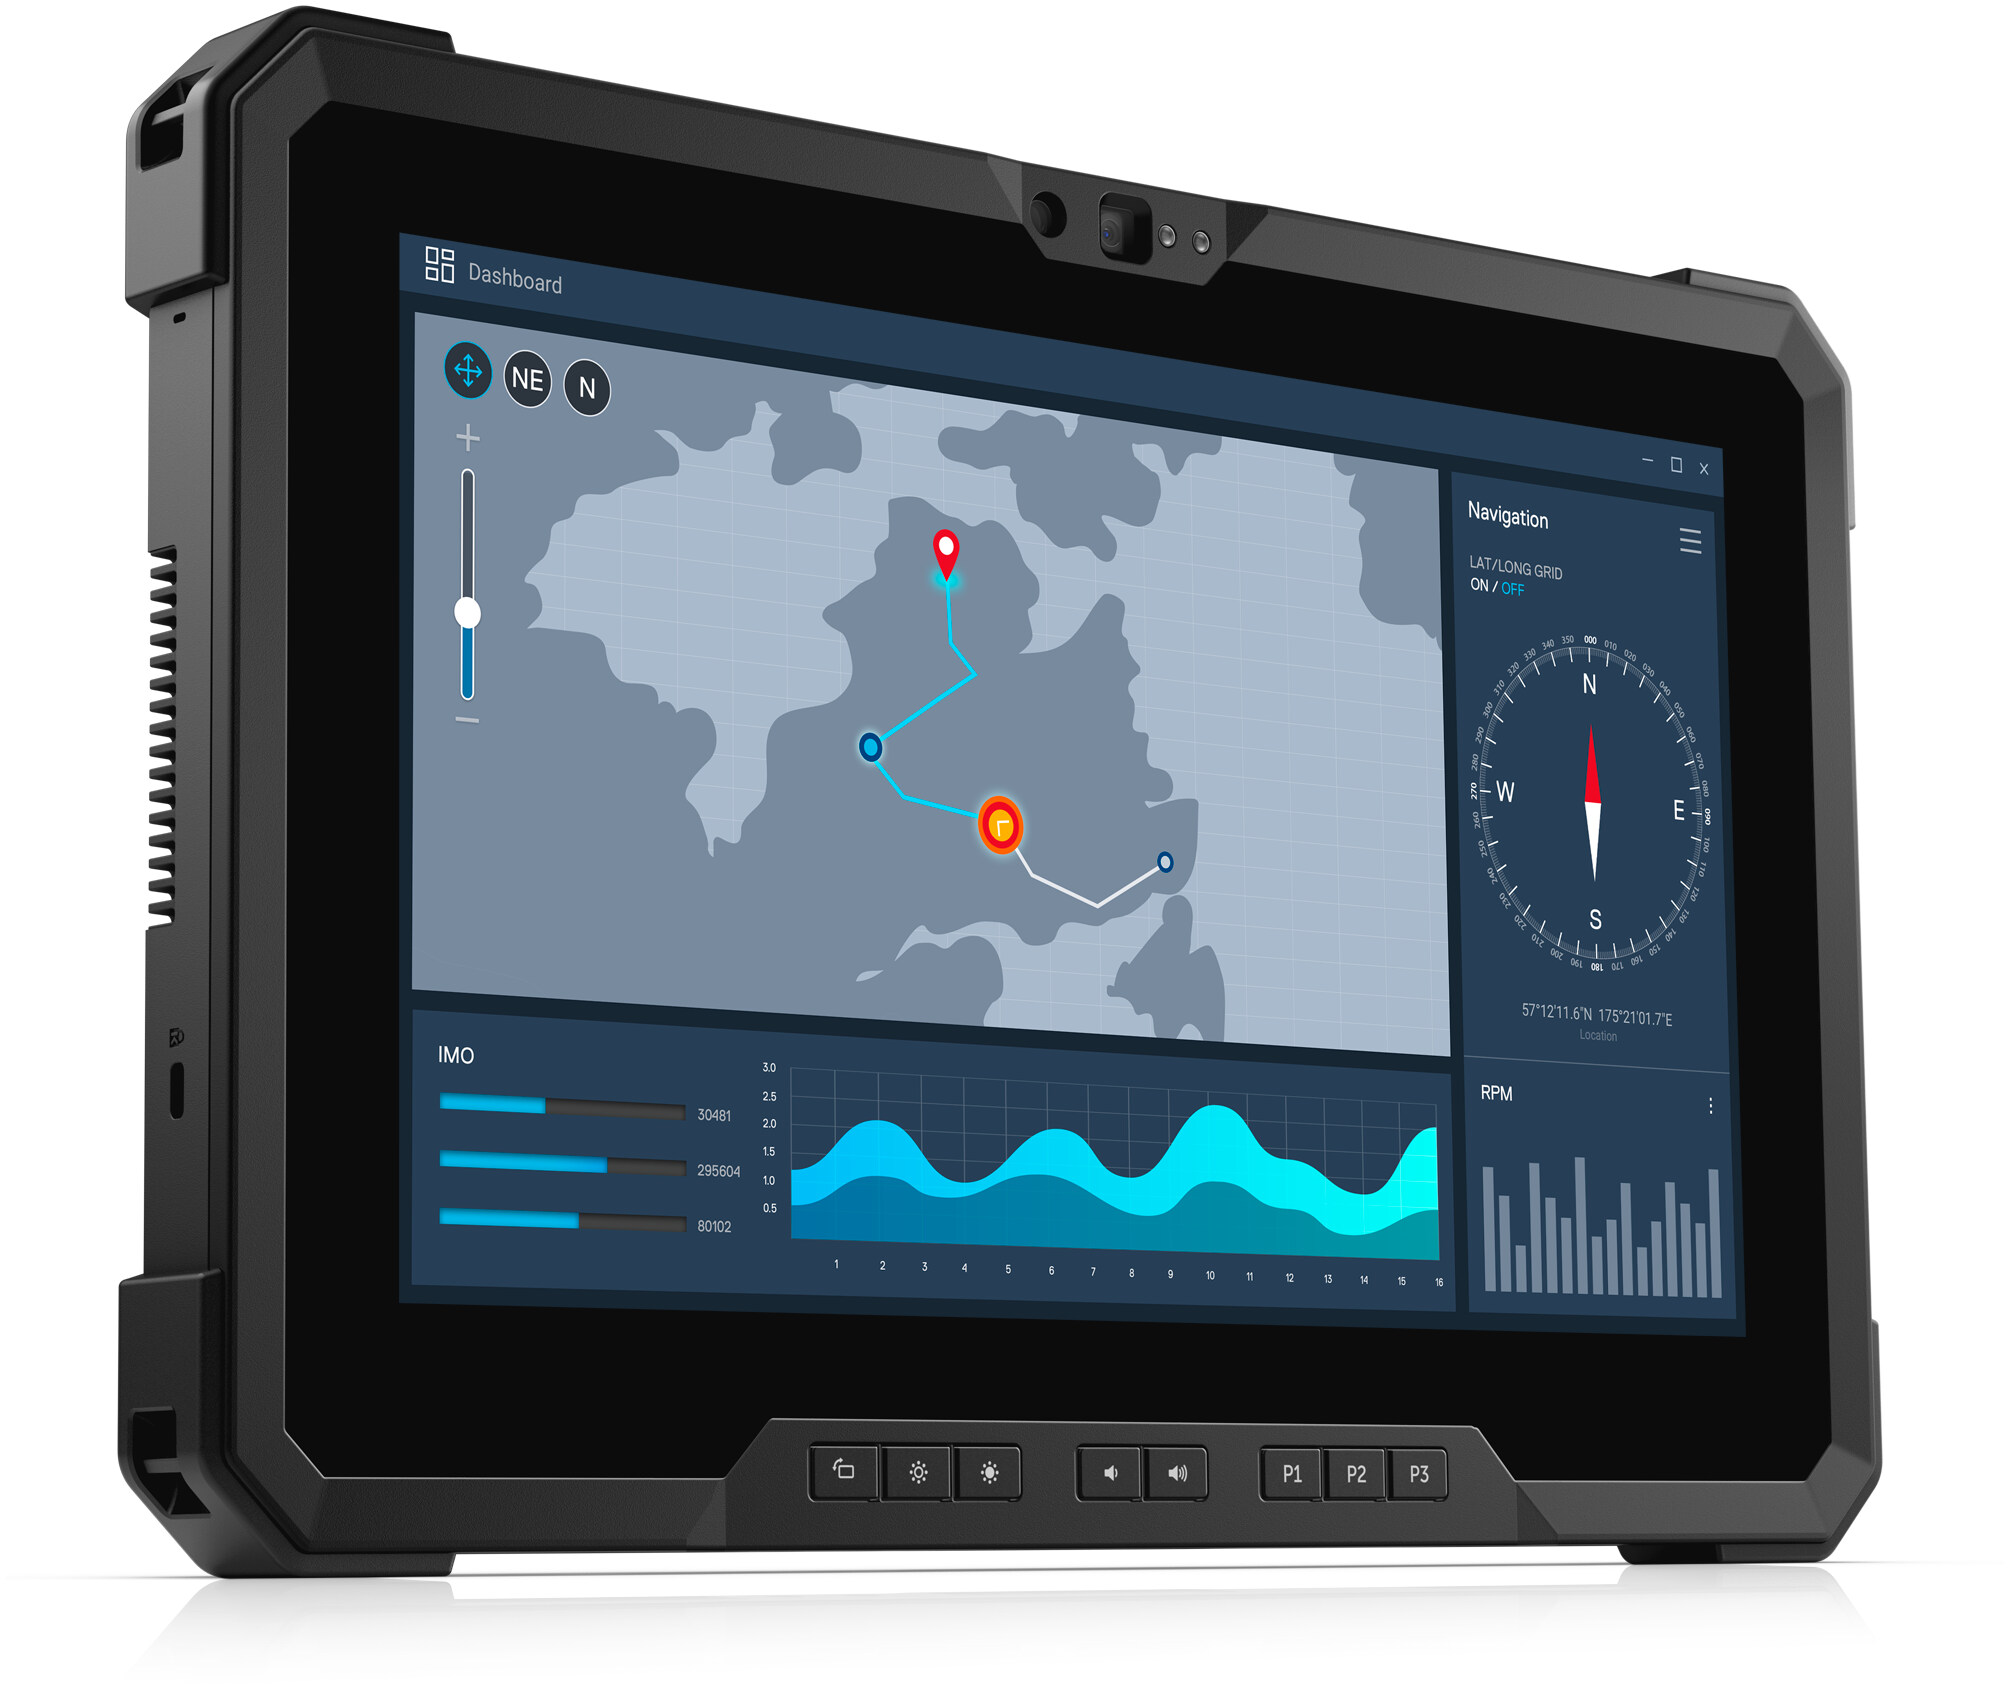 New Latitude 12 7220 Rugged Extremeタブレット | Dell 日本